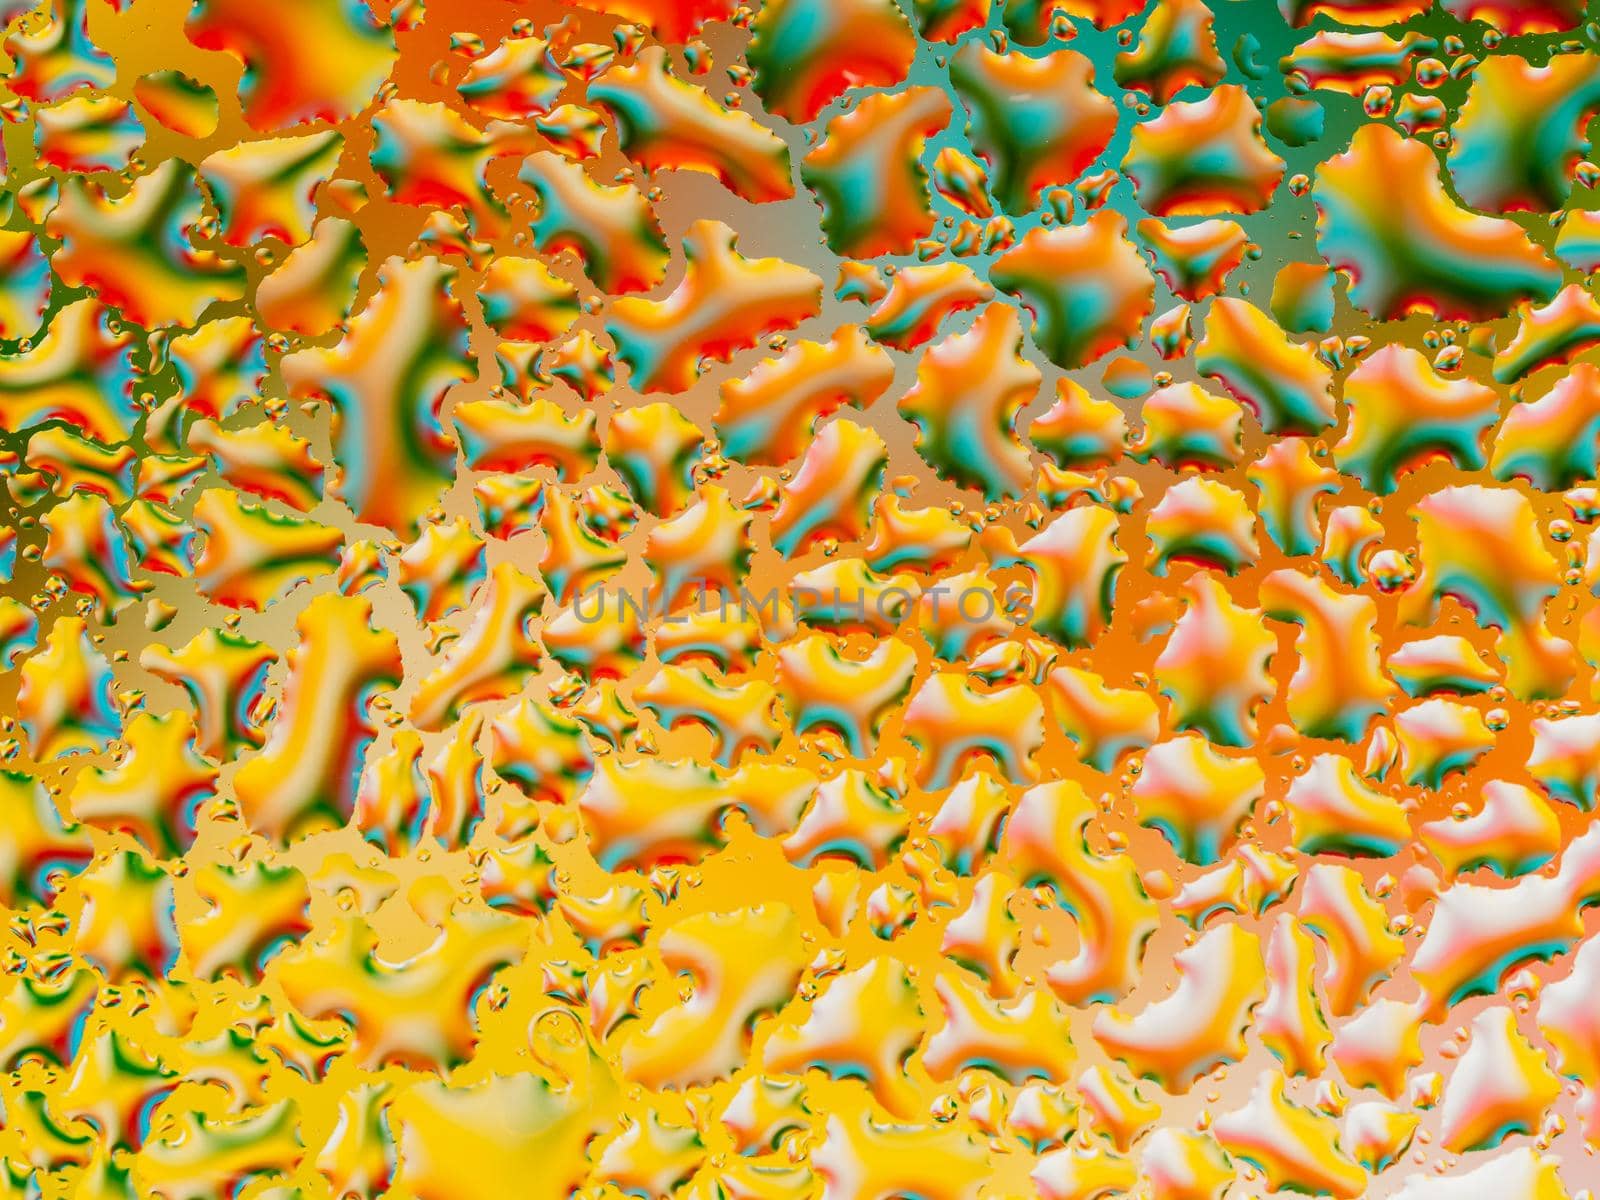 Abstract coloful vivid background with large and small convex drops of water on glass, condensation on window. Macro, close up.